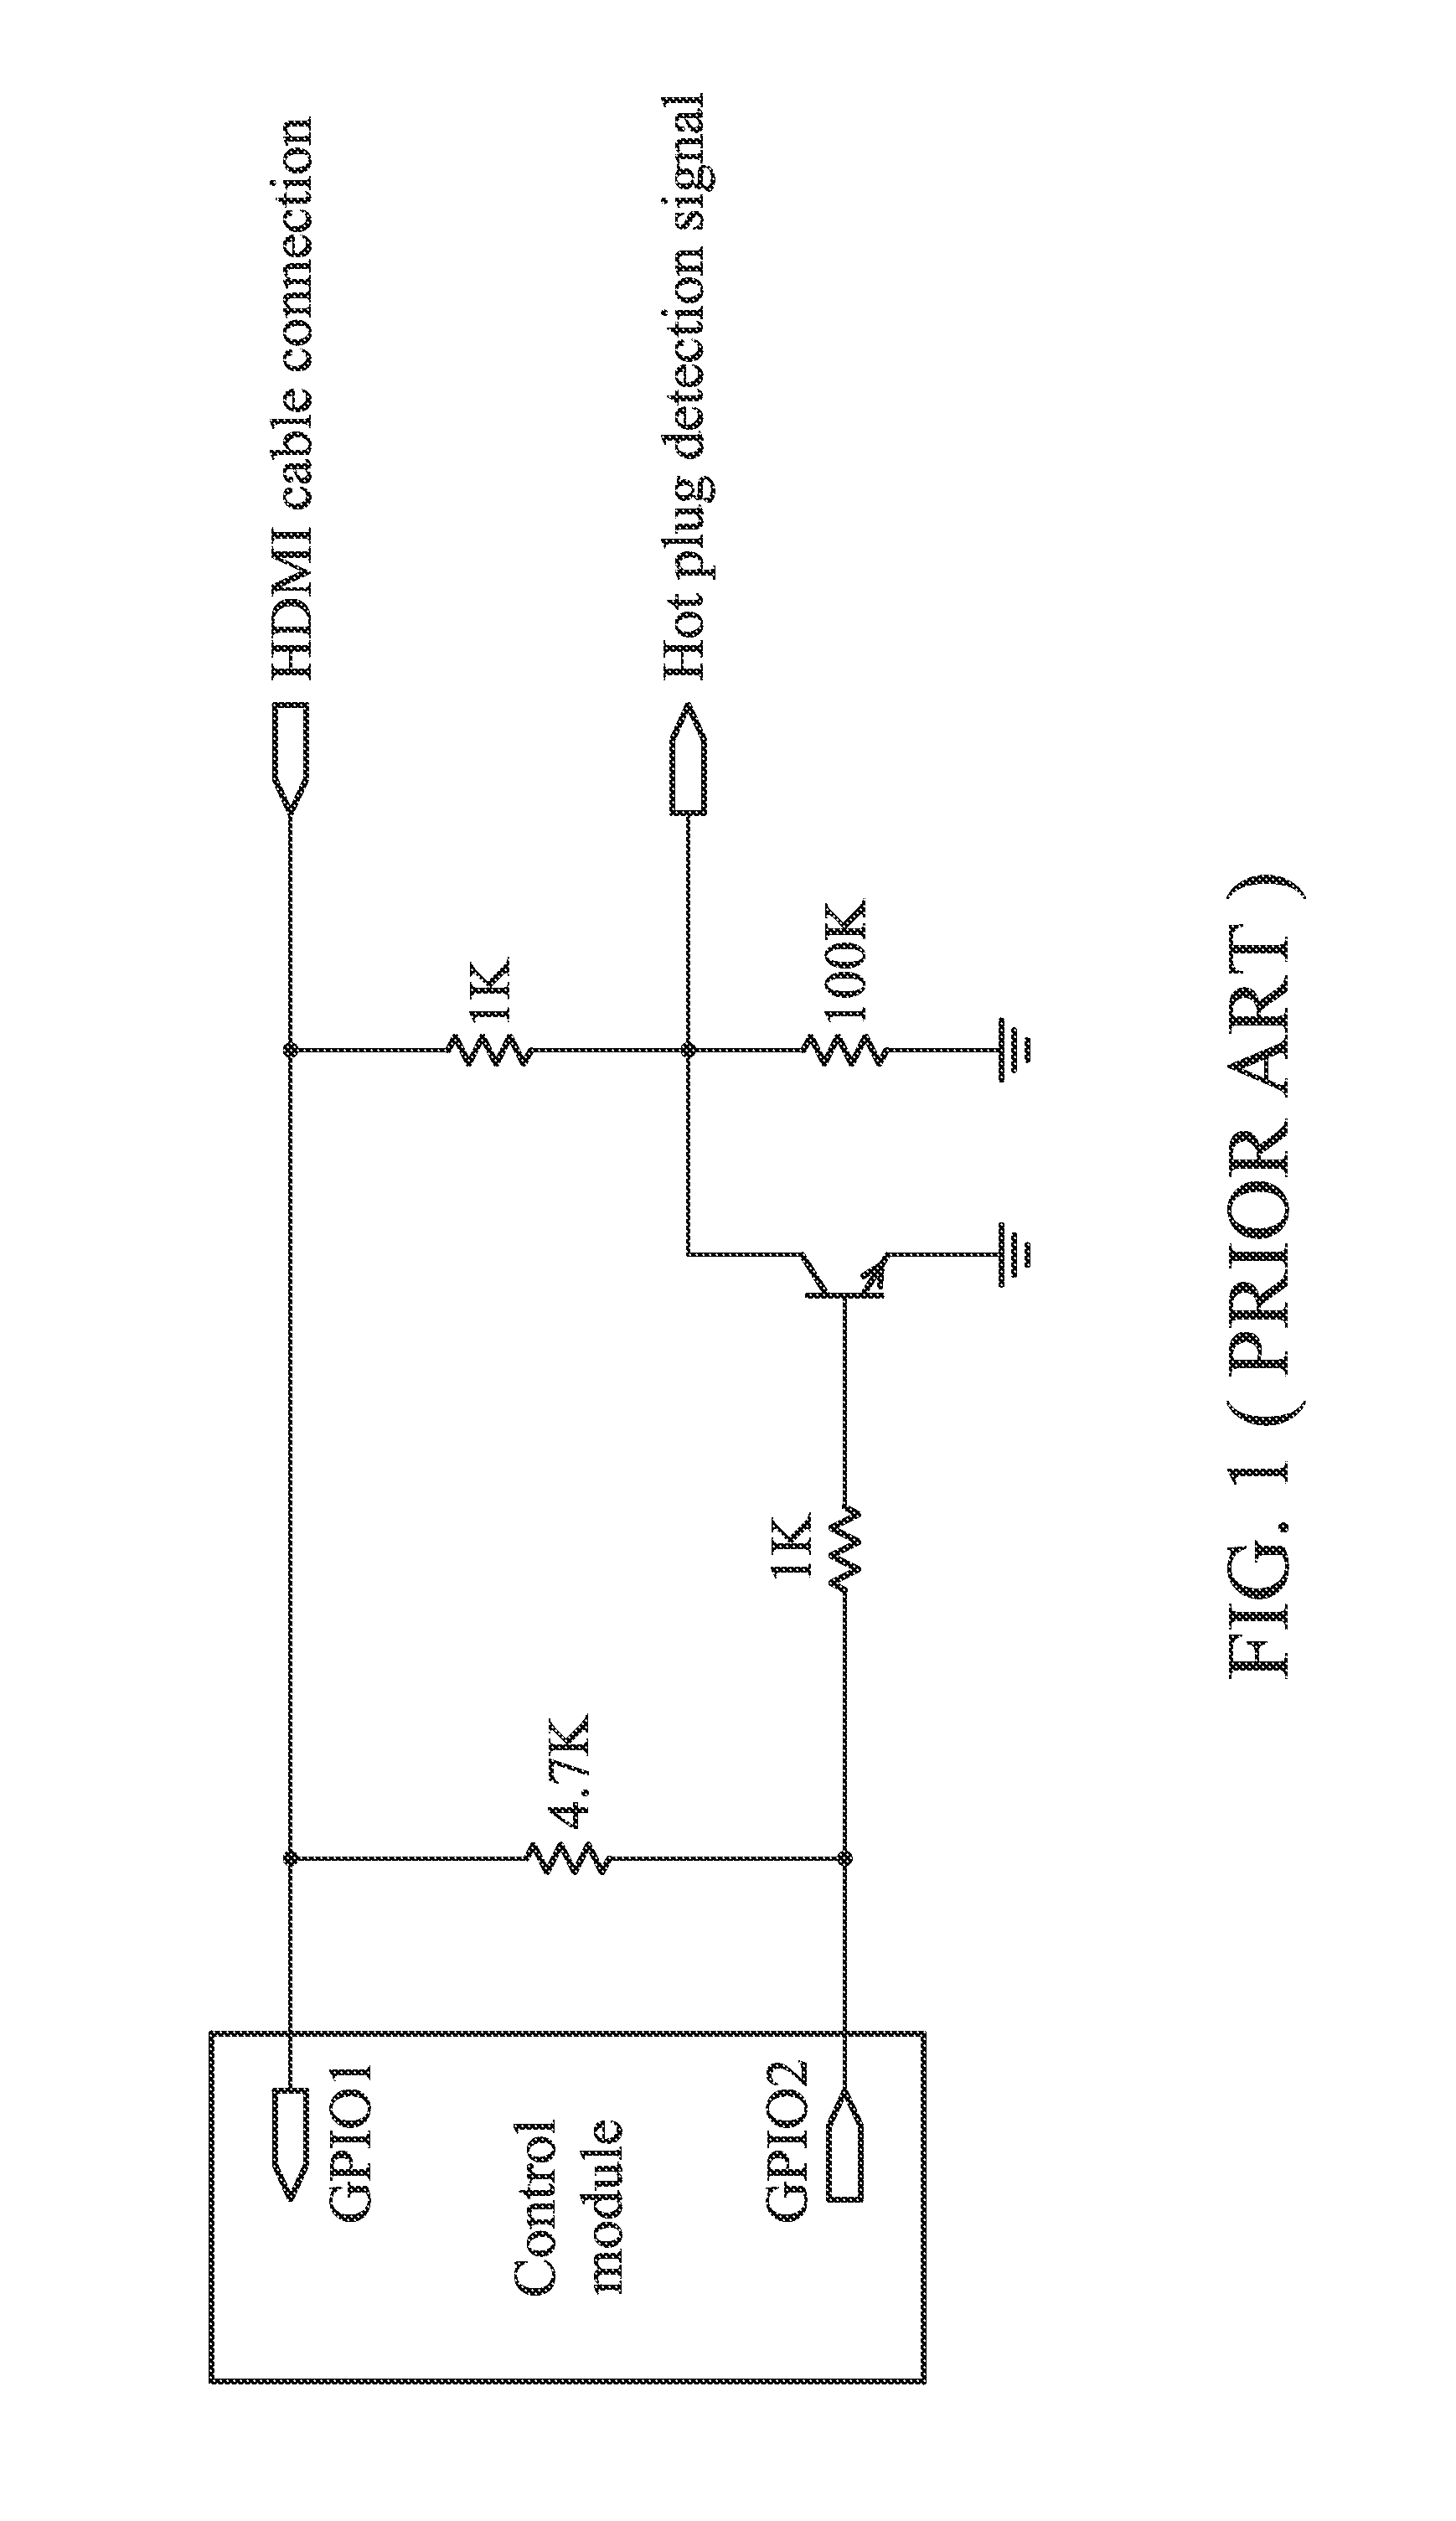 High-definition multimedia interface (HDMI) receiver apparatuses, HDMI systems using the same, and control methods therefor